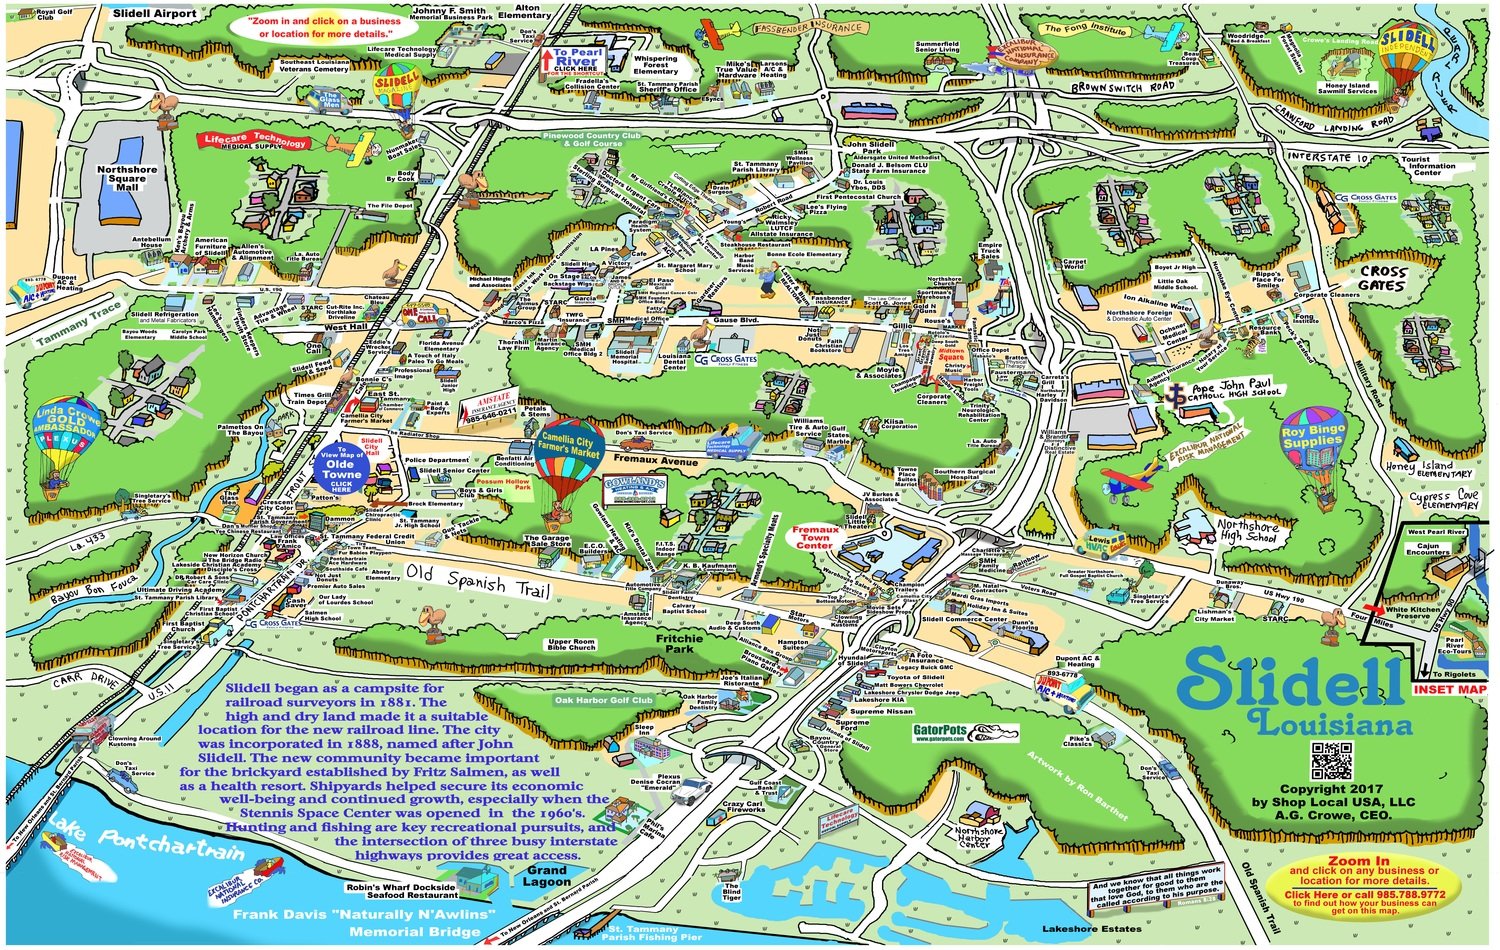 24" X 36" Full Color Caricature Rendering of Slidell, LA